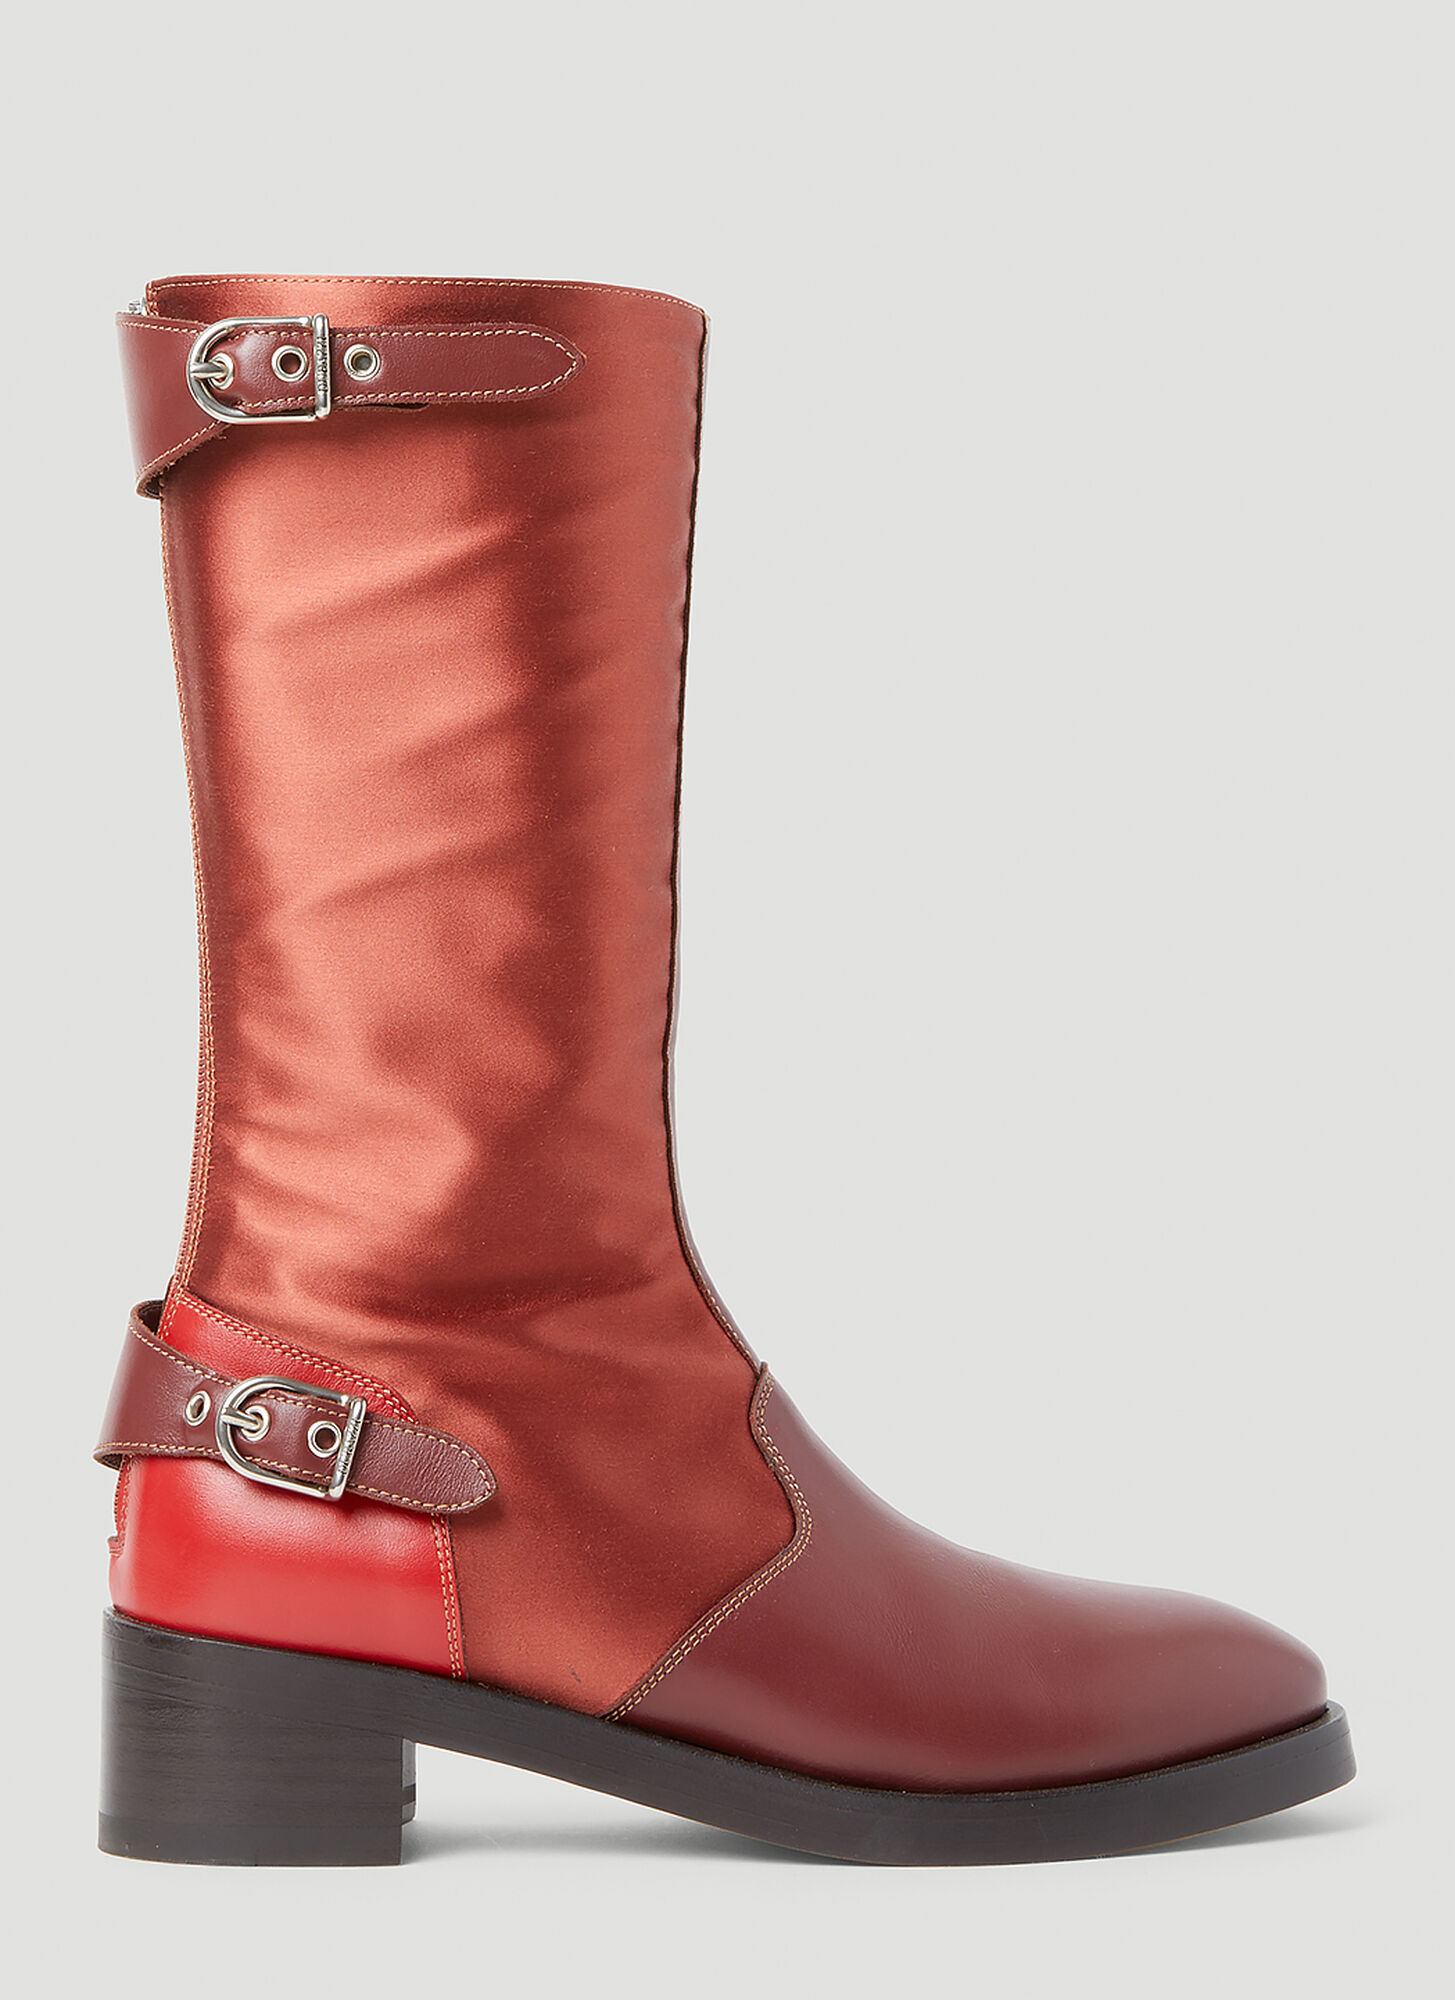 Durazzi Milano Buckle Boots In Red